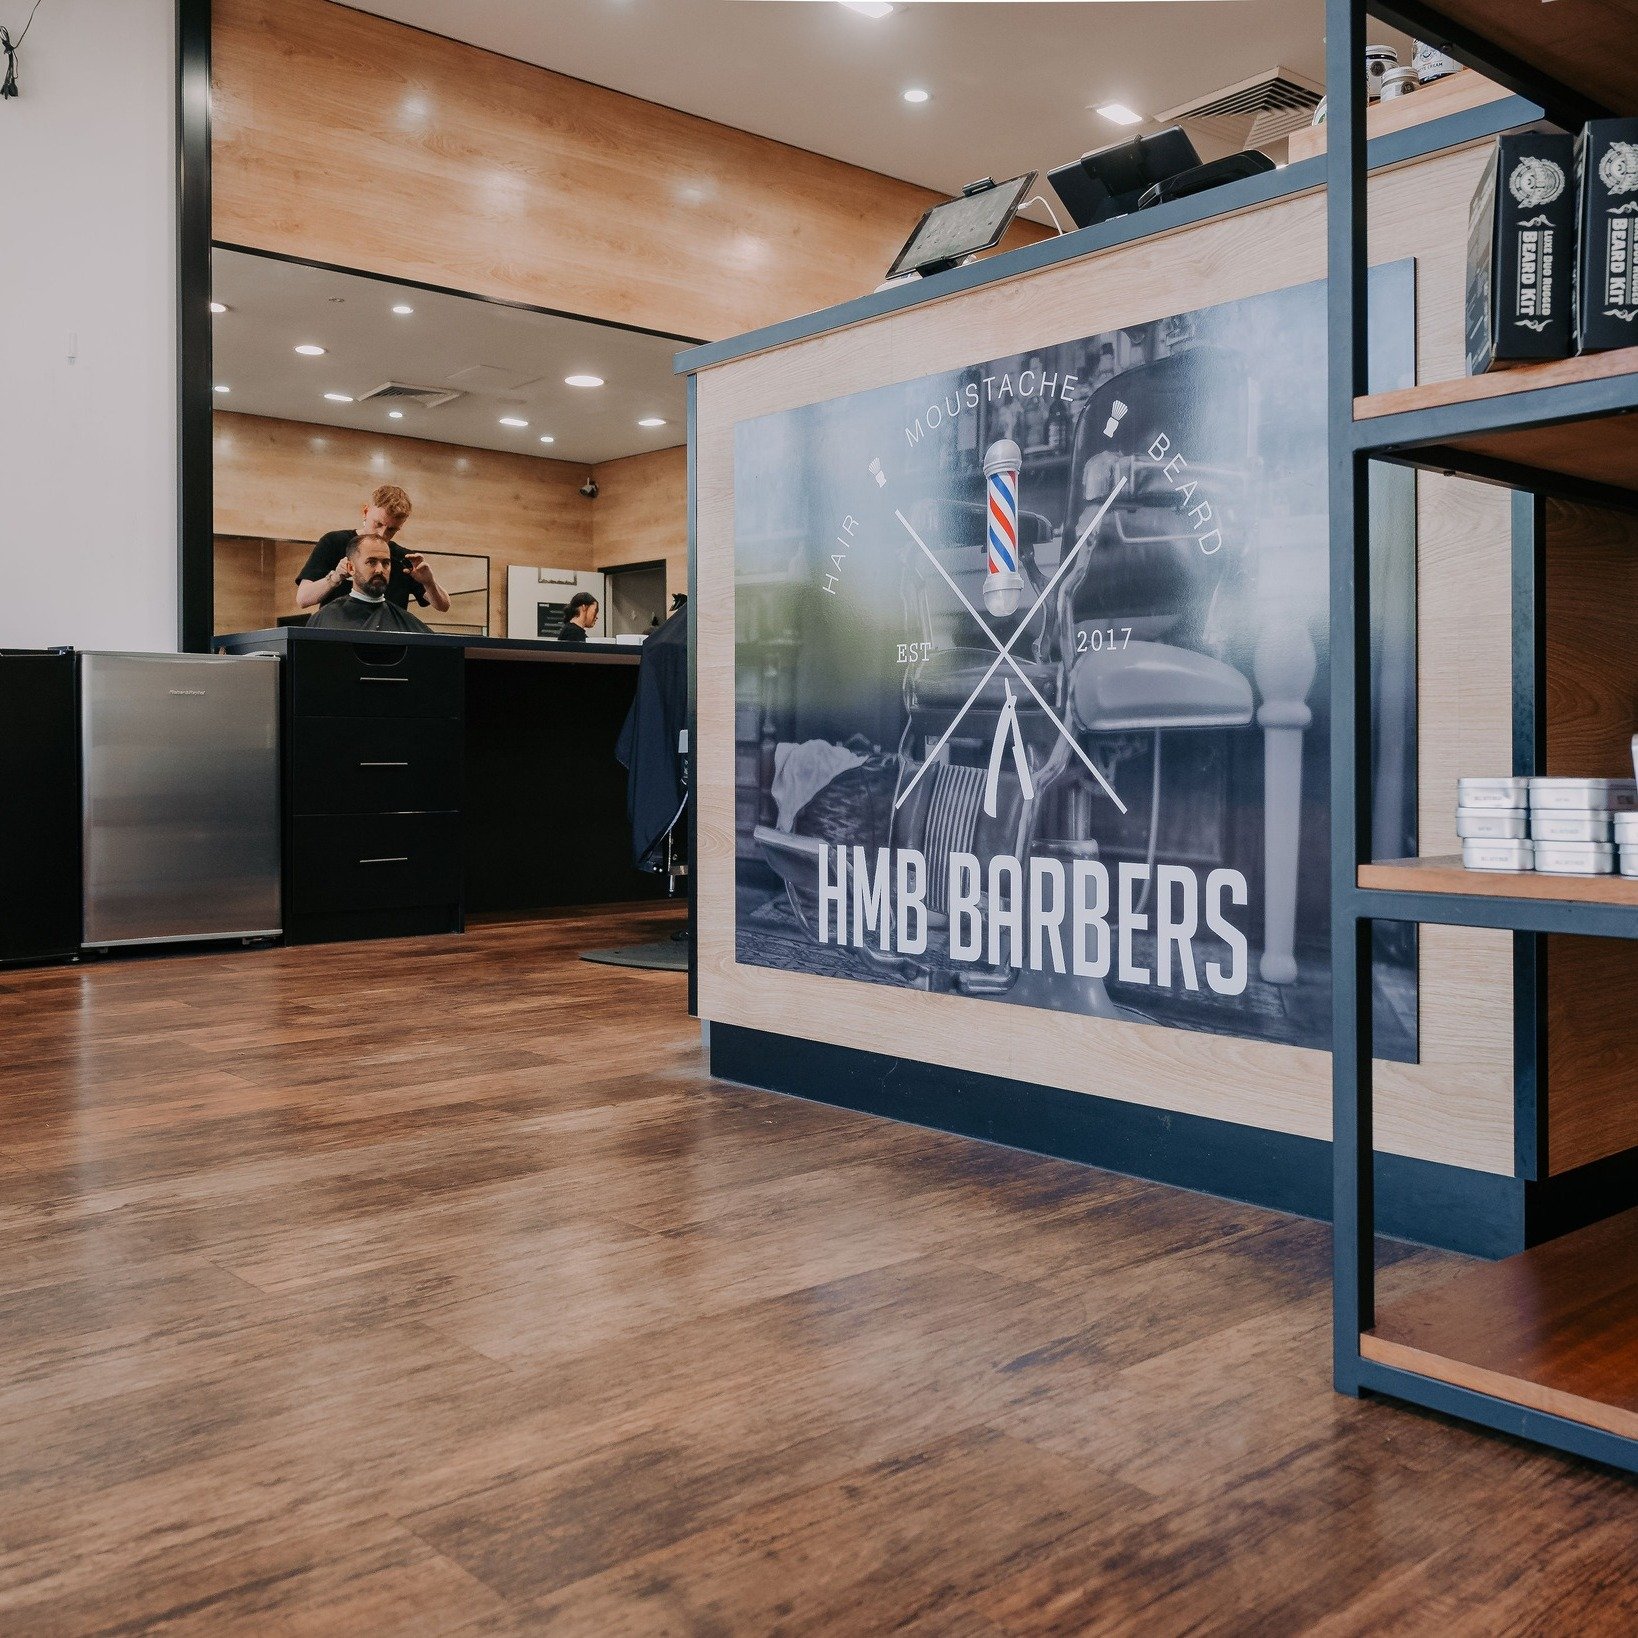 Time for a freshen up? We've got you sorted for the long weekend! What are your plans for the long weekend? Let us know in the comments!

&quot;#hmbbarbers #hmb #barberfade #haircut #barberlife
#barbershopconnect #barberlove #fade #beard
#burstfade #